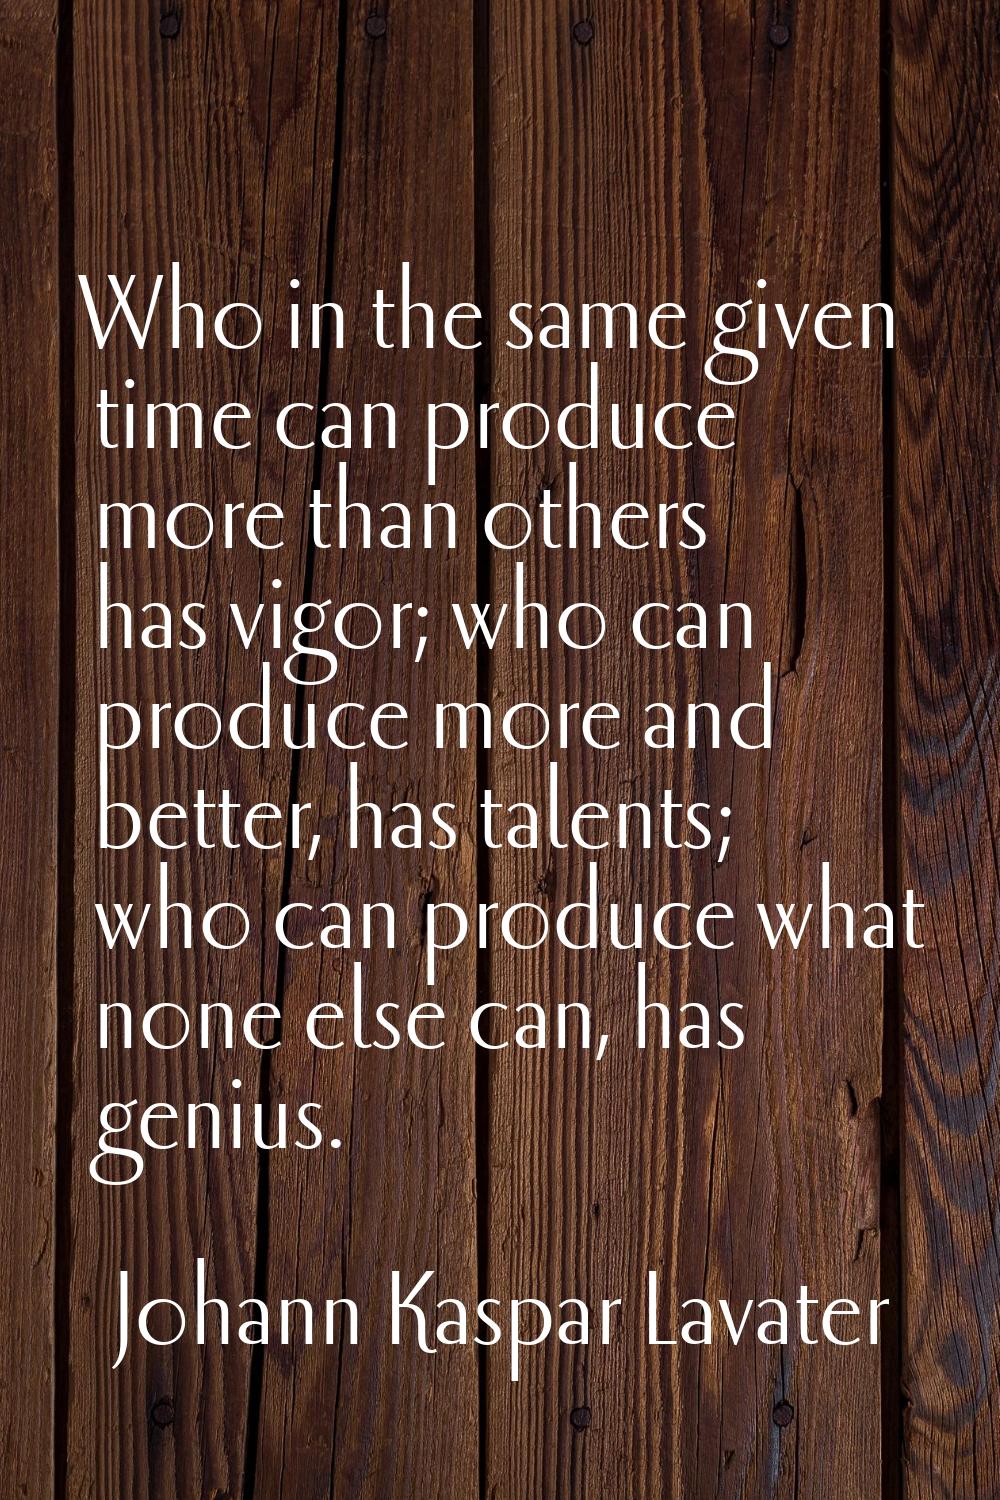 Who in the same given time can produce more than others has vigor; who can produce more and better,